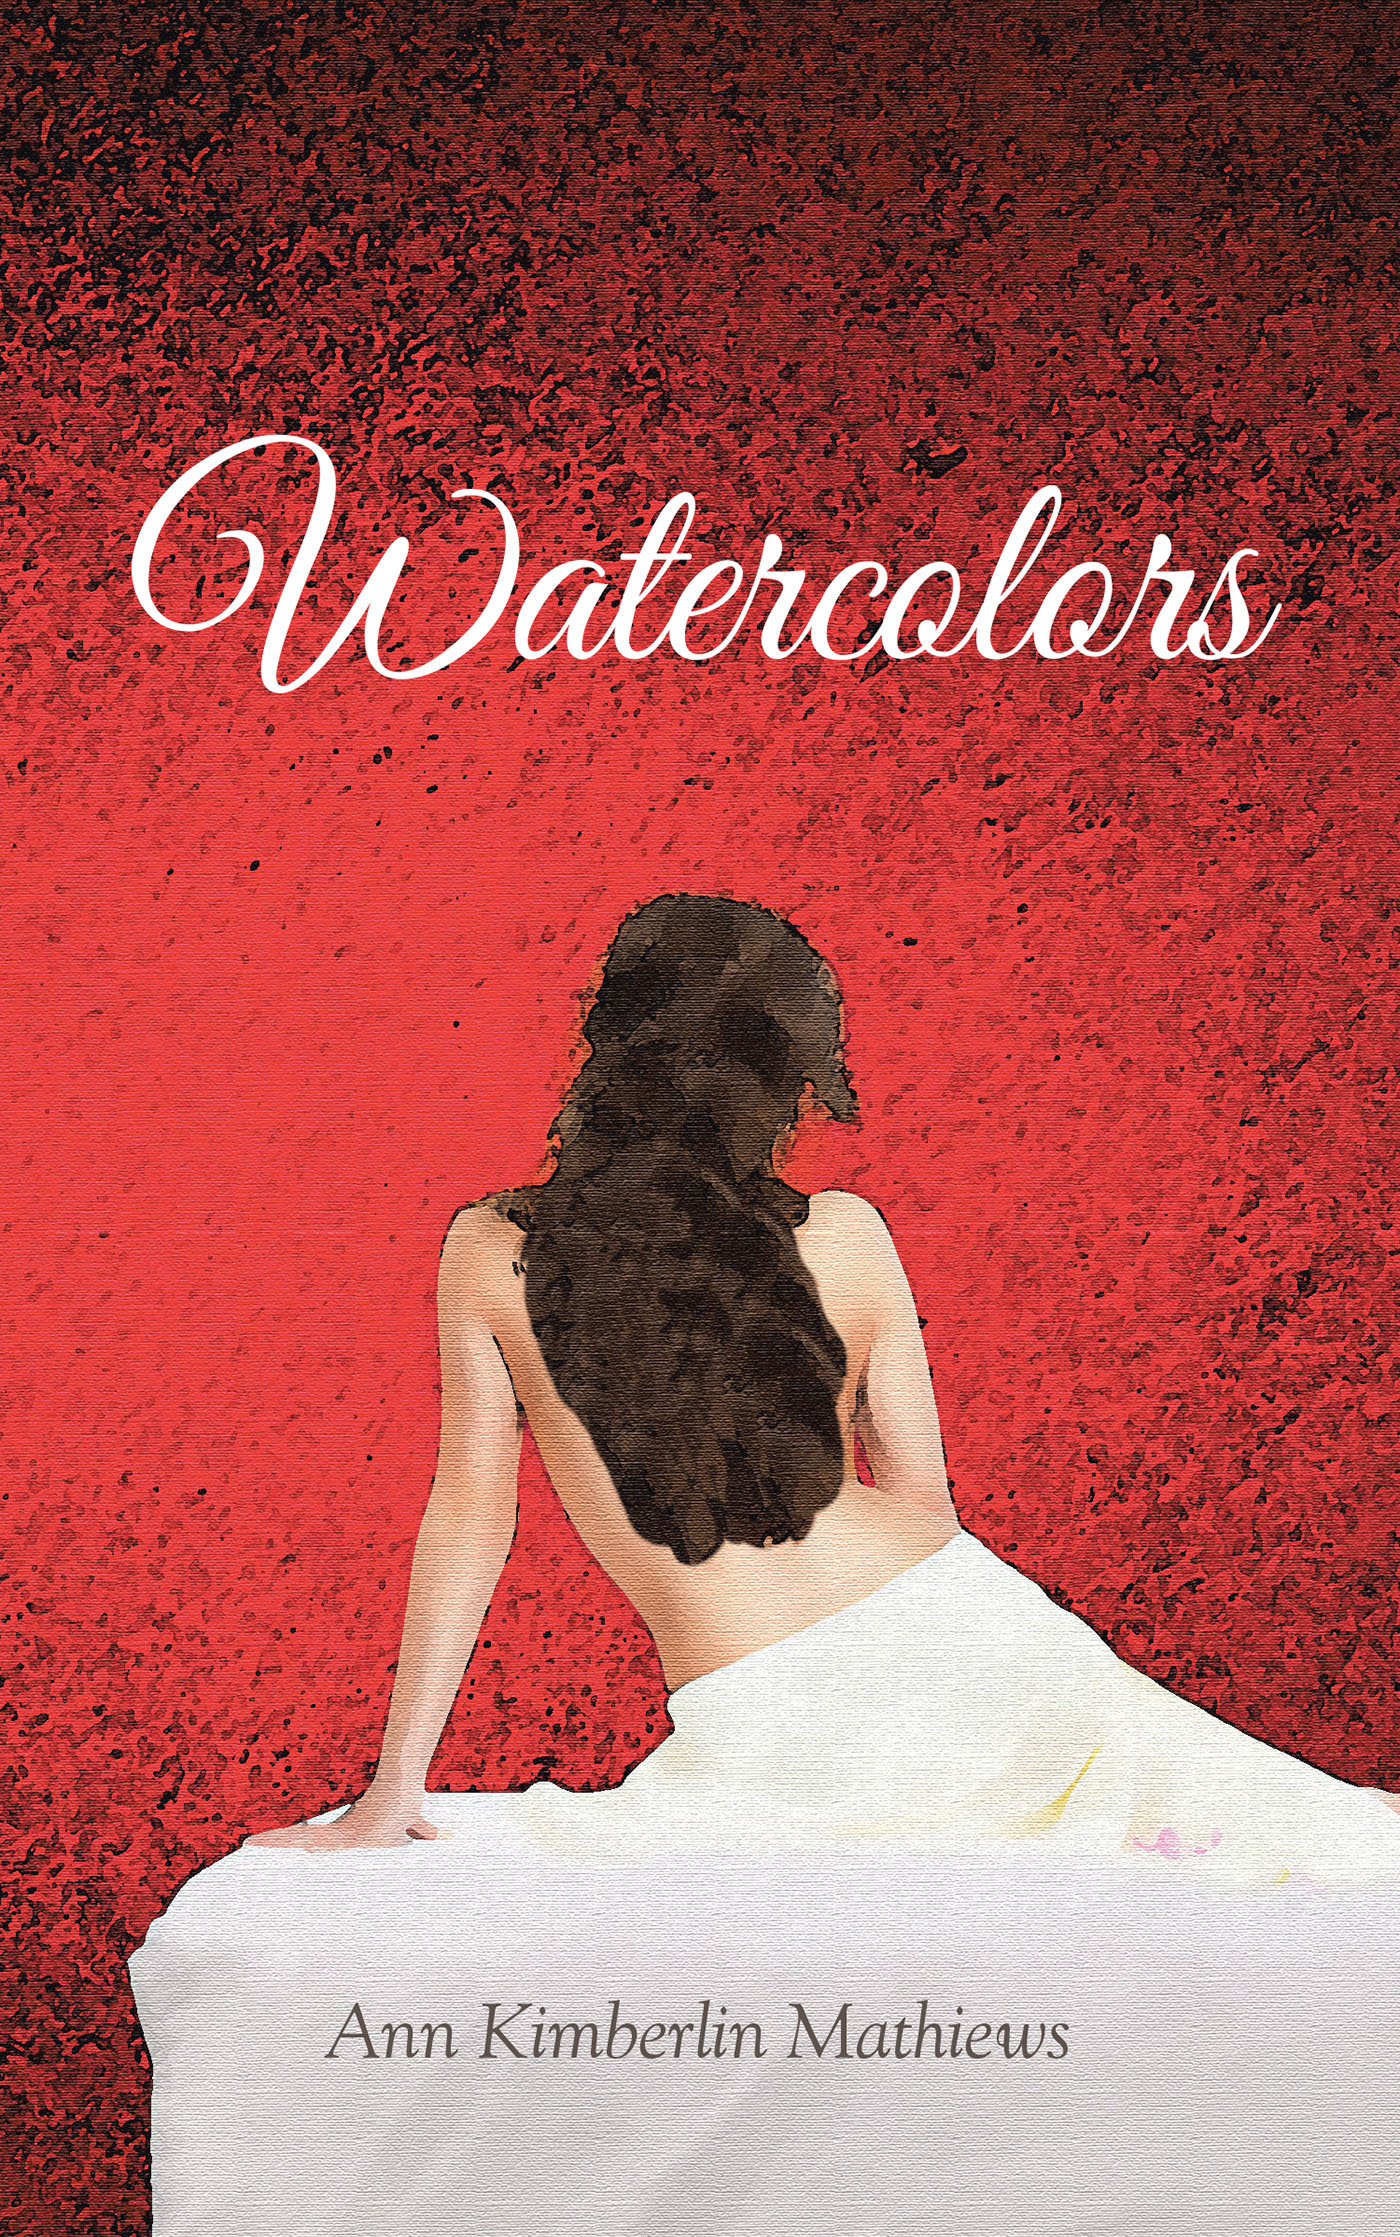 Ann Kimberlin Mathiews’s Newly Released “Watercolors” is a Compelling Tale of Discovery and Unexpected Connection